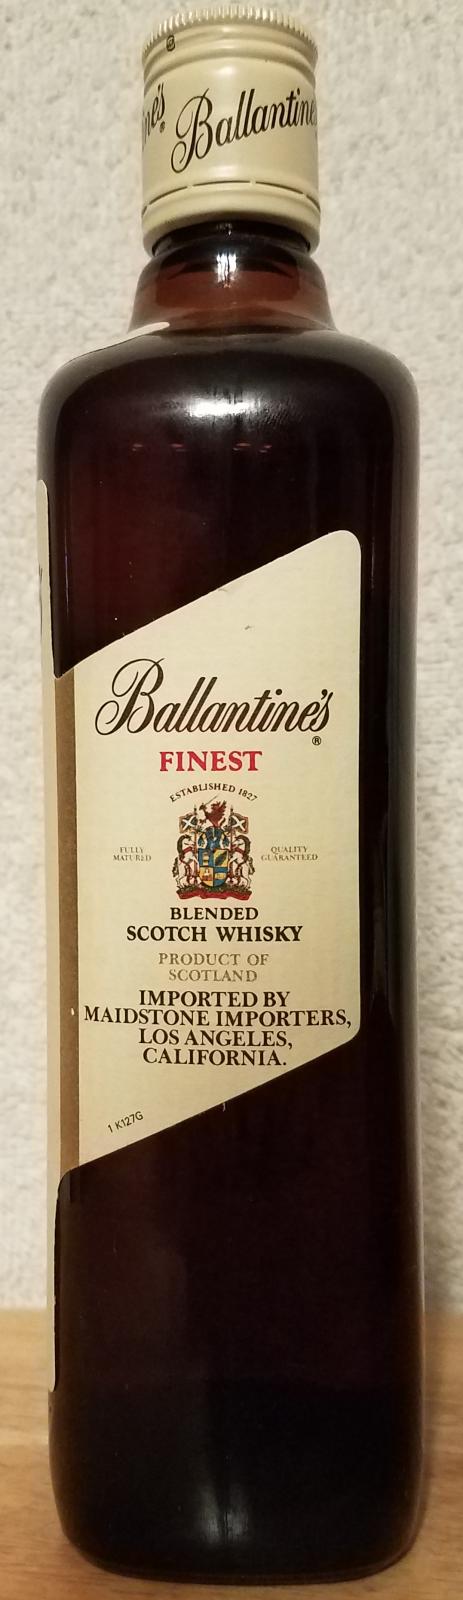 Ballantine's Finest Scotch Whisky - Ratings and reviews - Whiskybase